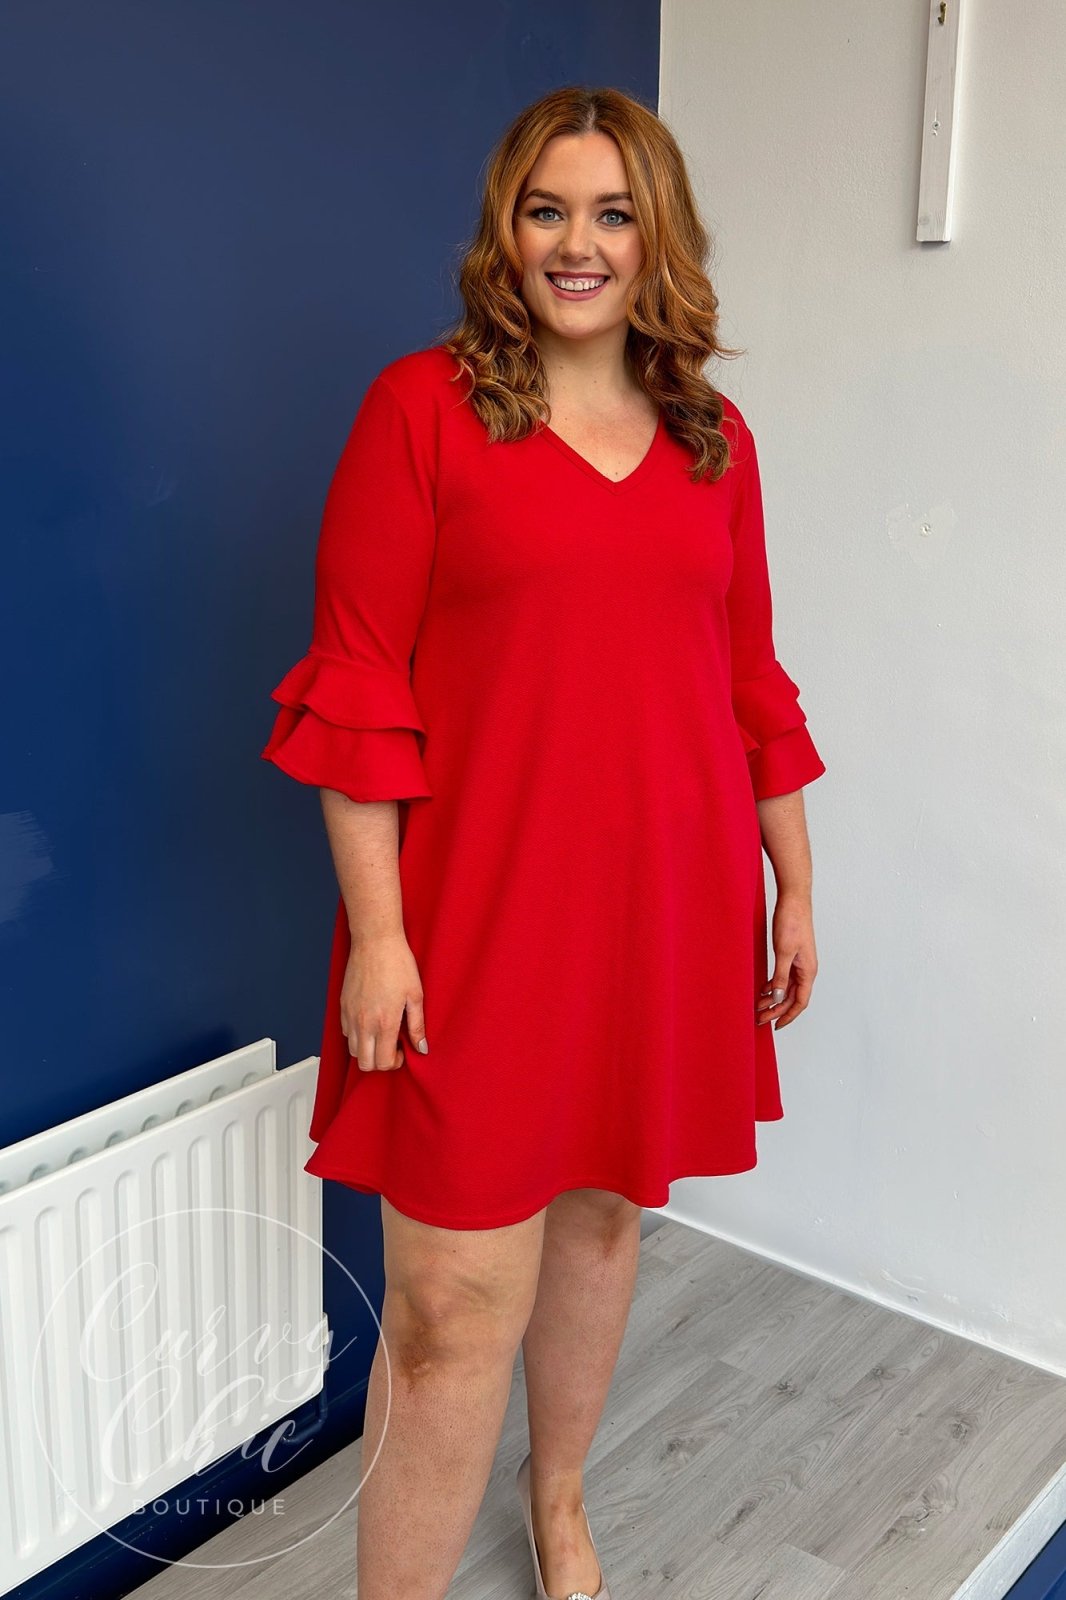 V-neck Plus Size Fluted Sleeve Midi Dress in Black or Red - Curvy Chic Boutique